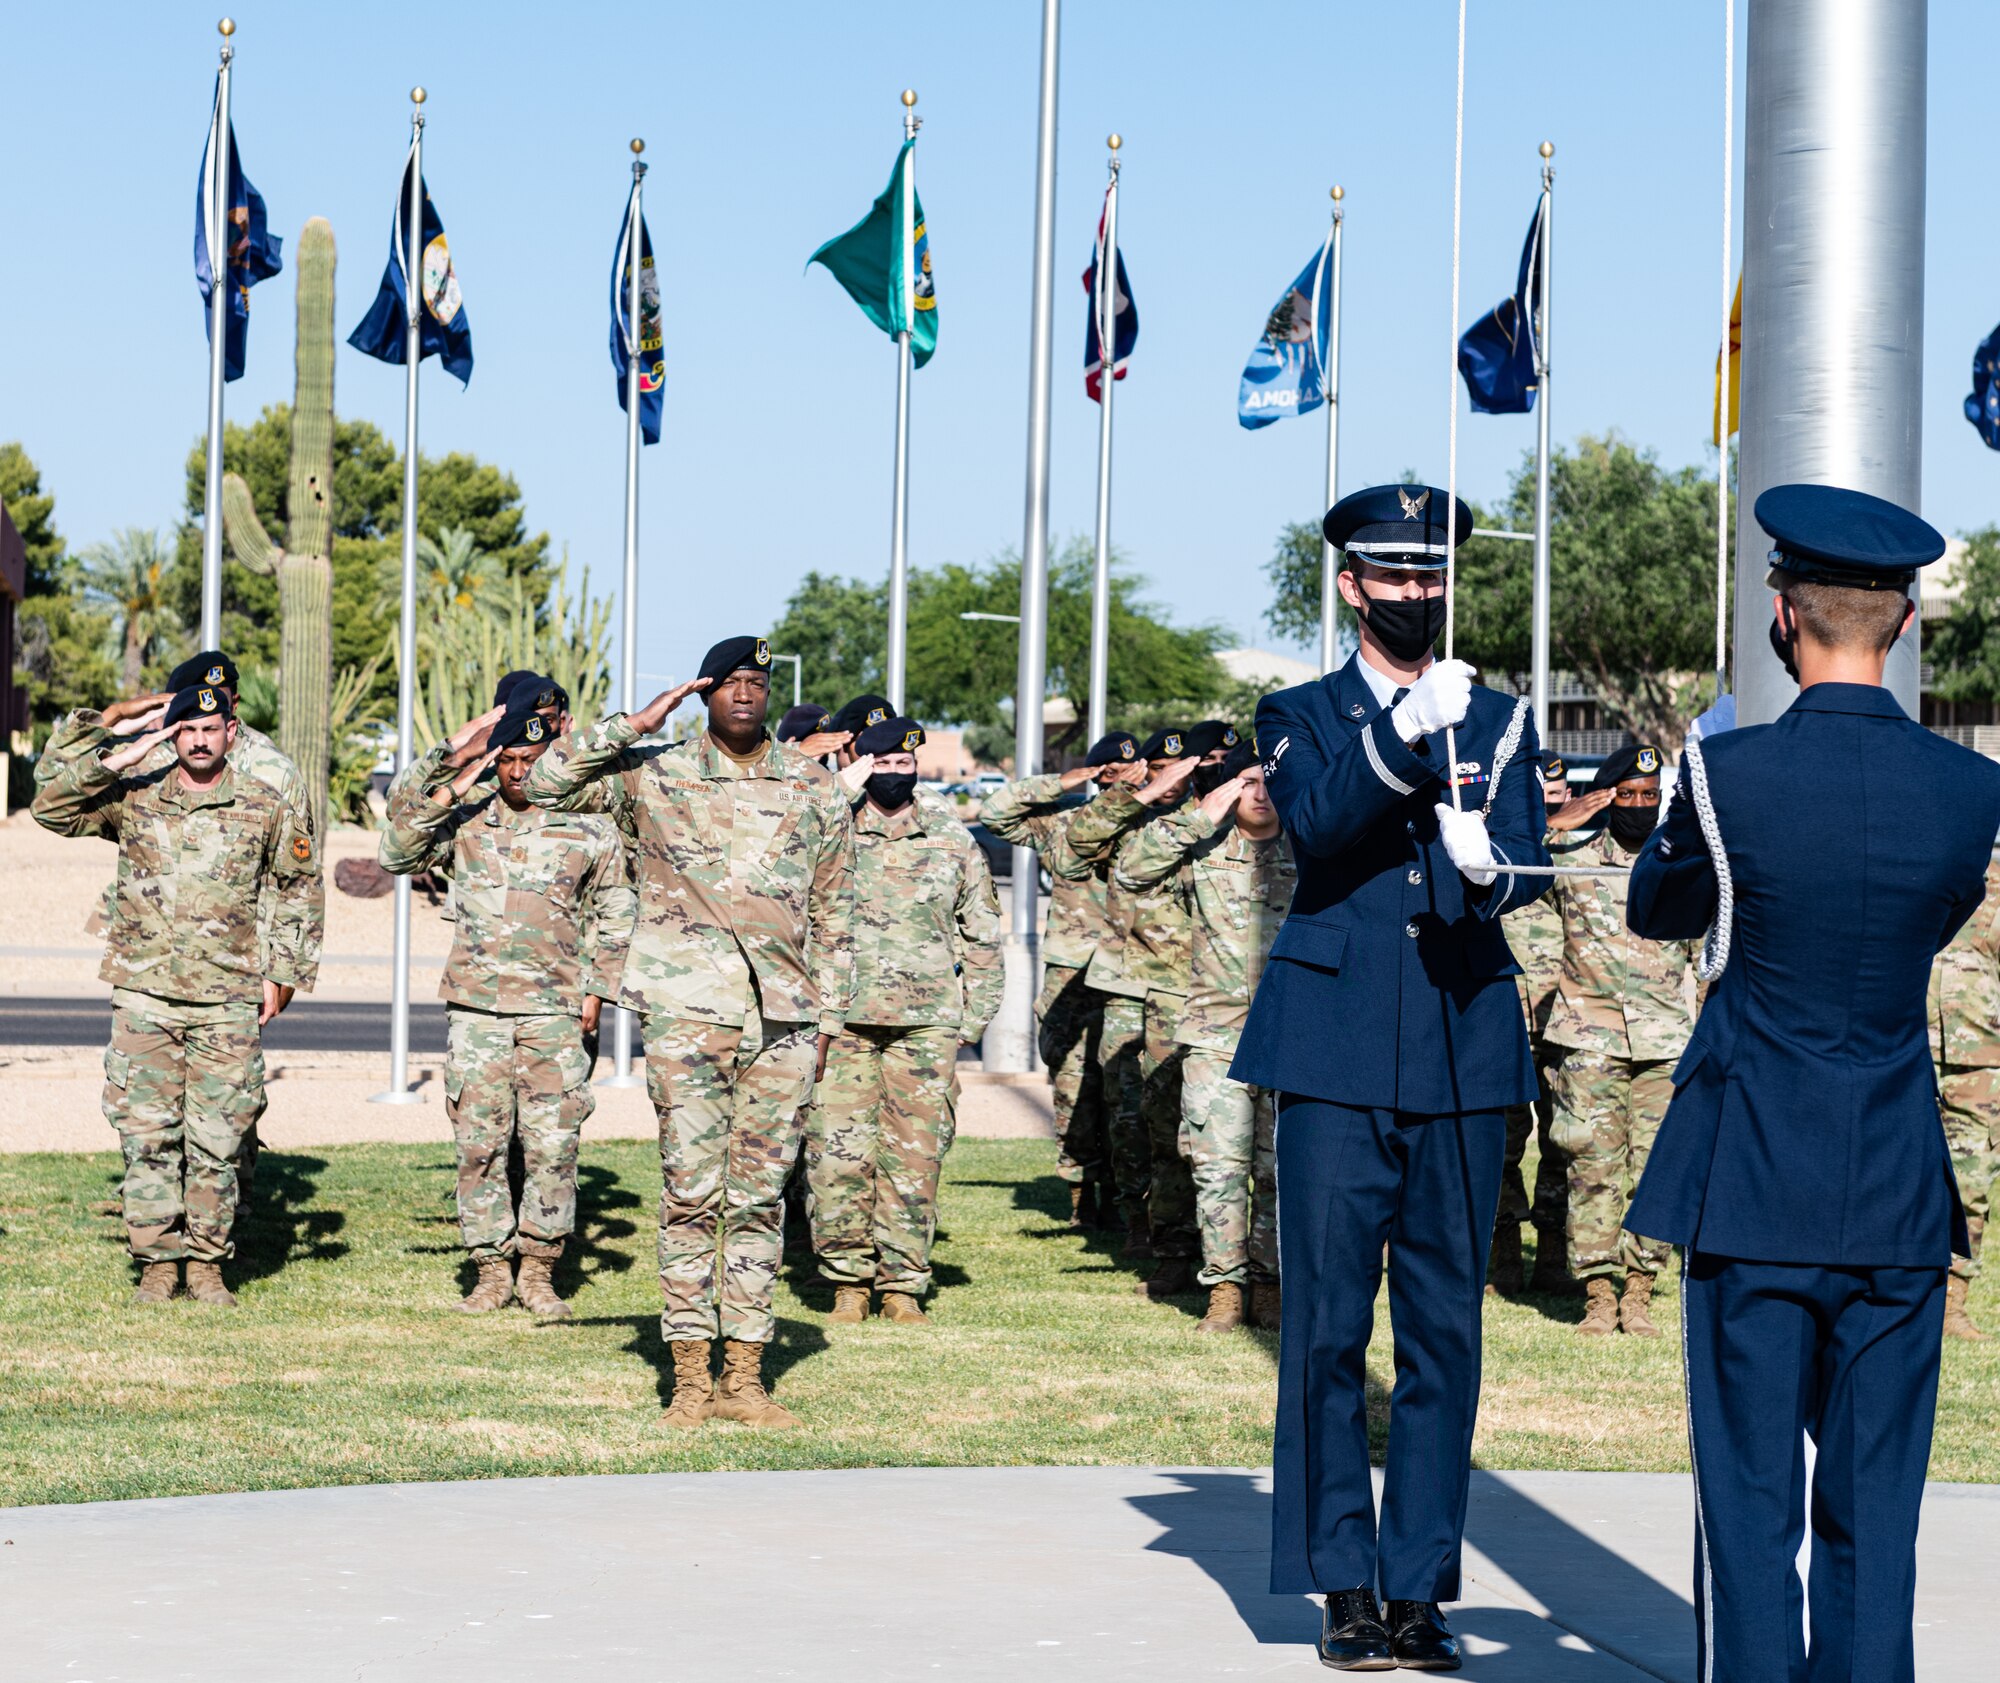 Airmen from the 56th Security Forces Squadron stand in formation while Luke Air Force Base Honor Guard lowers a flag during the S.S. Mayaguez Memorial Retreat Ceremony, May 14, 2021, at Luke Air Force Base, Arizona.